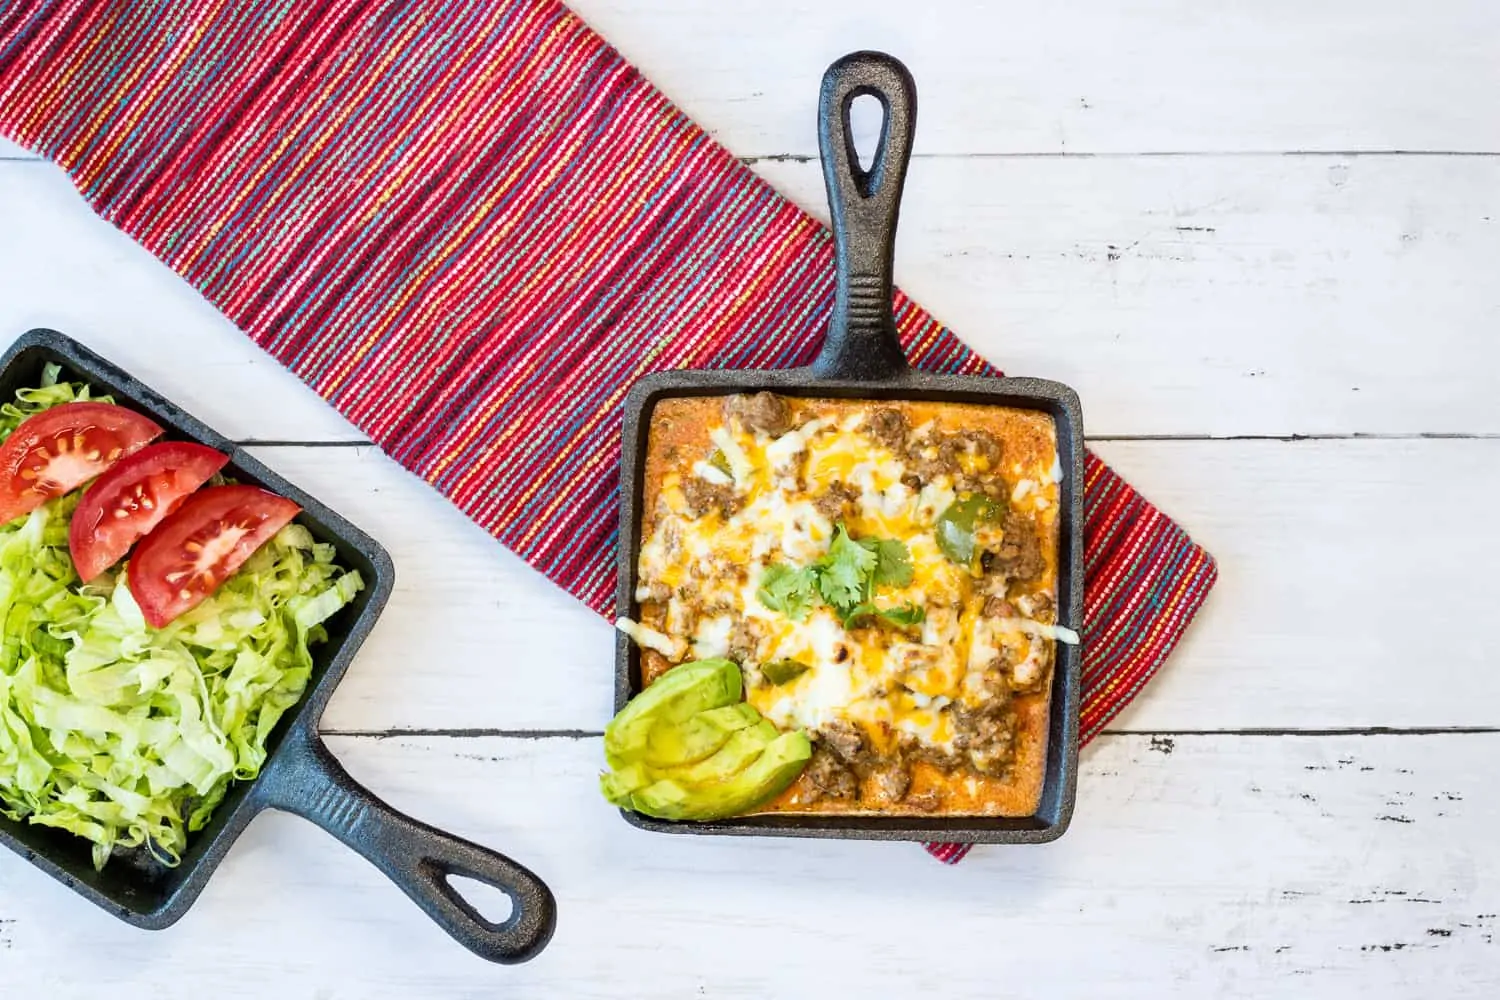 Tex-Mex Beef Casserole in a small square cast iron serving dish with another dish of lettuce and tomato on the side.